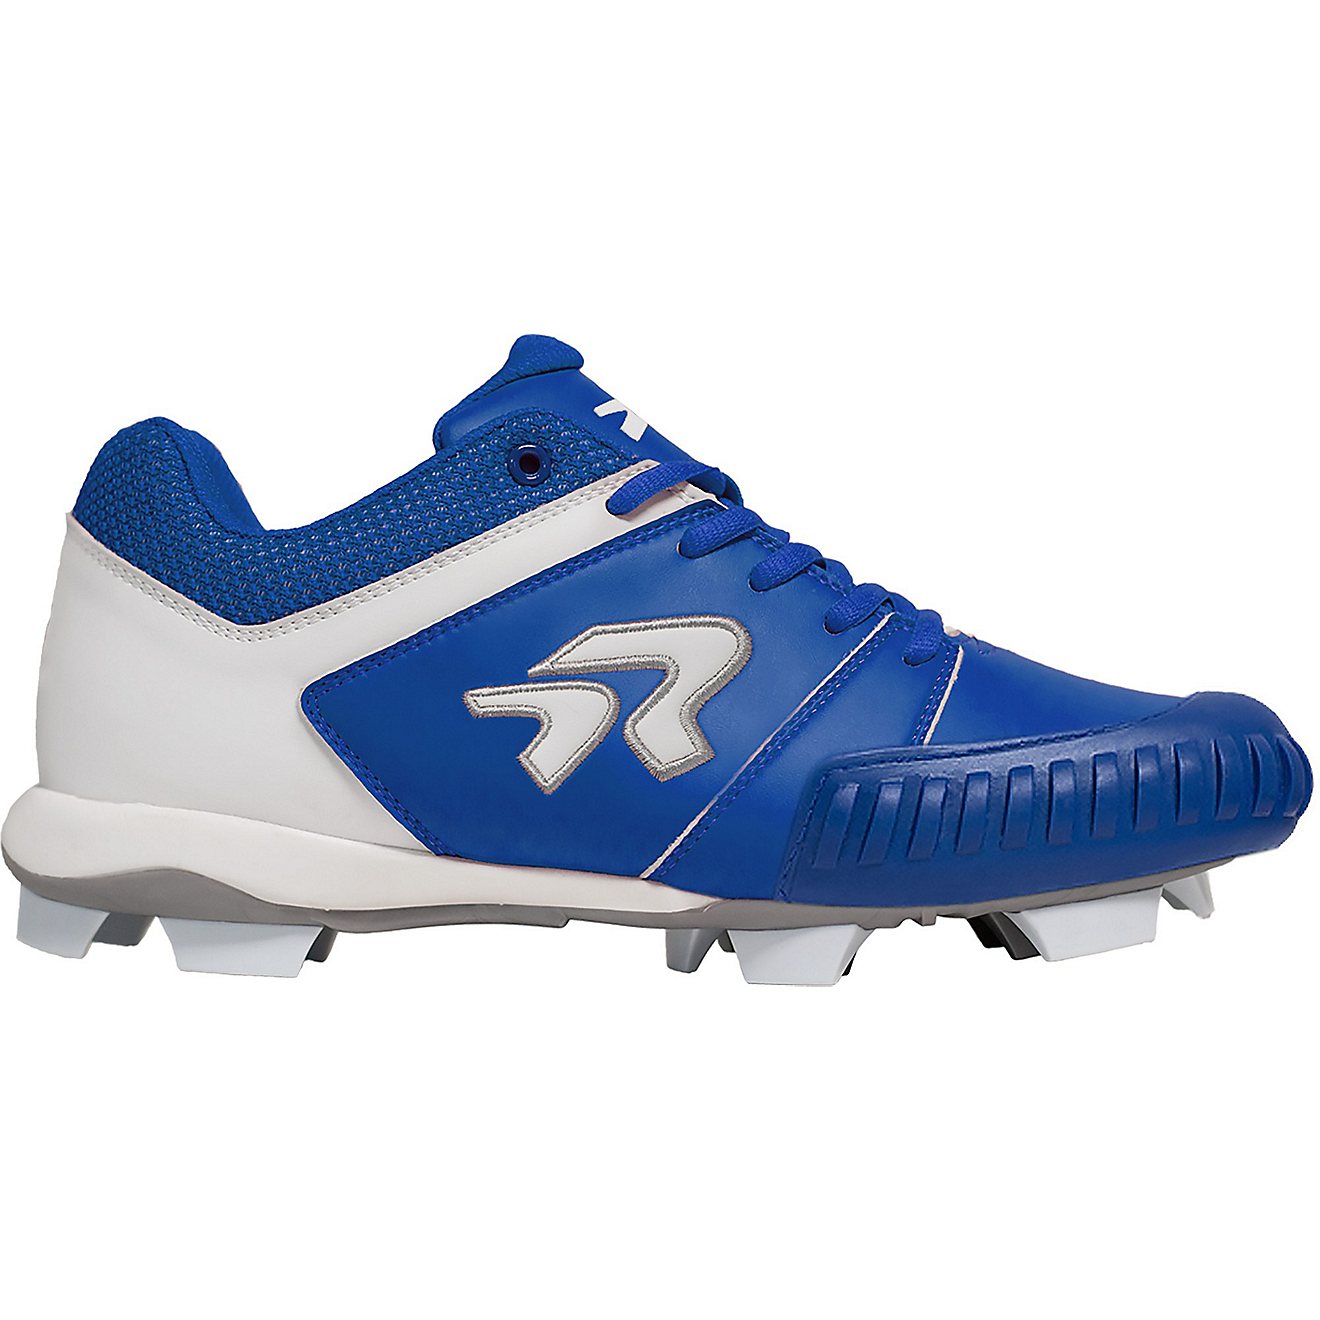 RIP-IT Women's Ringor Flite Pitching Toe Softball Cleats                                                                         - view number 1